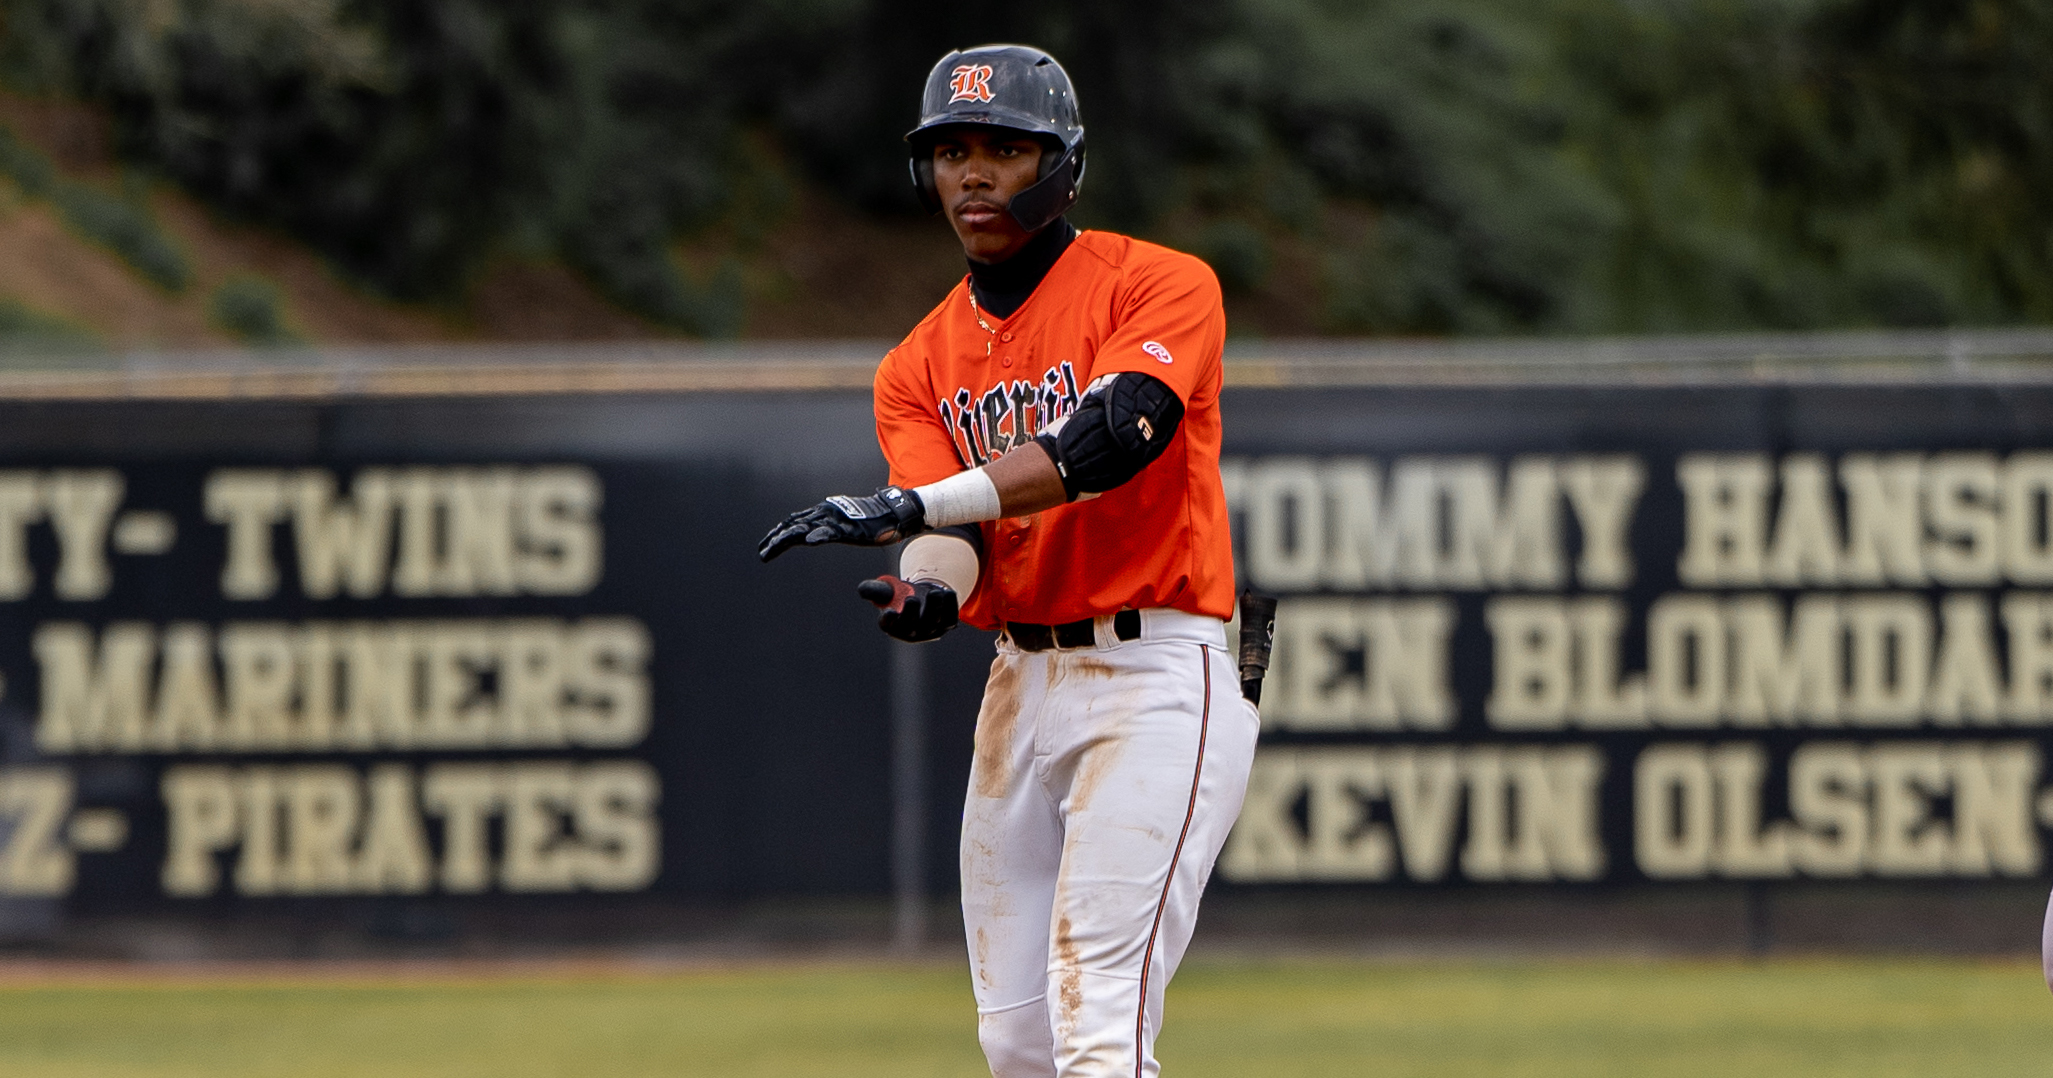 Murray Jr. Hits for the Cycle in Win Over Golden West